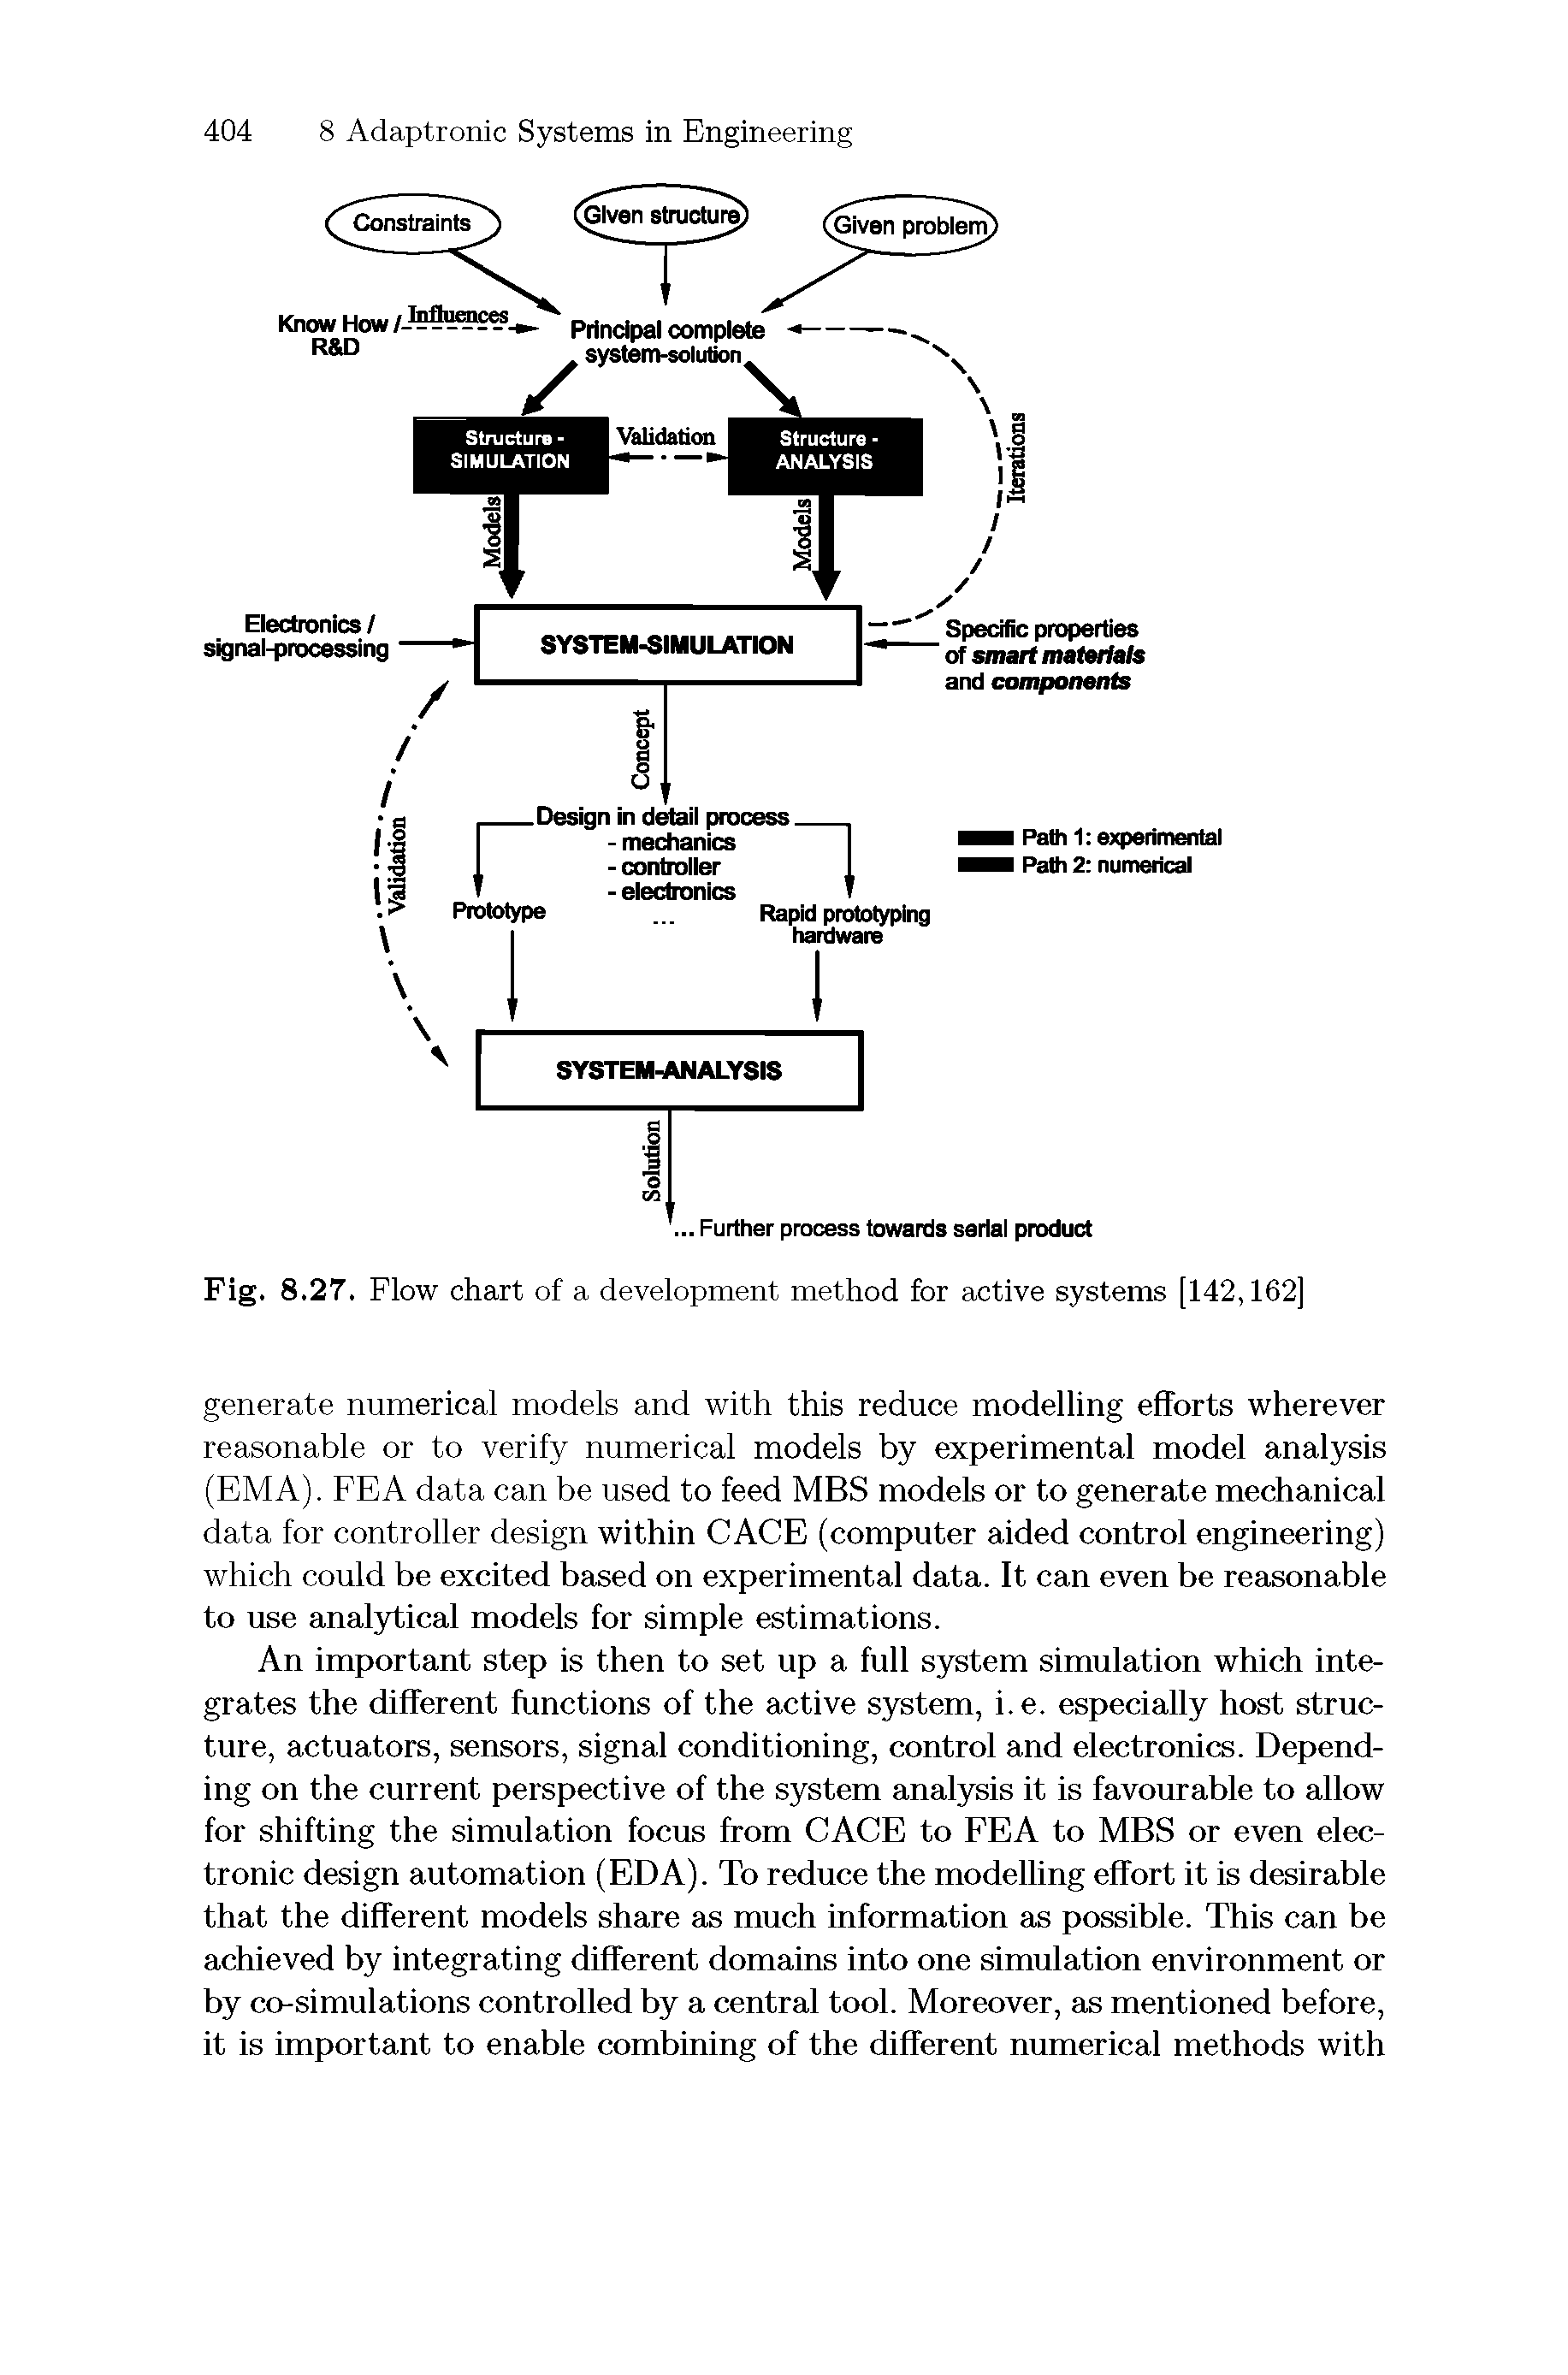 Fig. 8.27. Flow chart of a development method for active systems [142,162]...